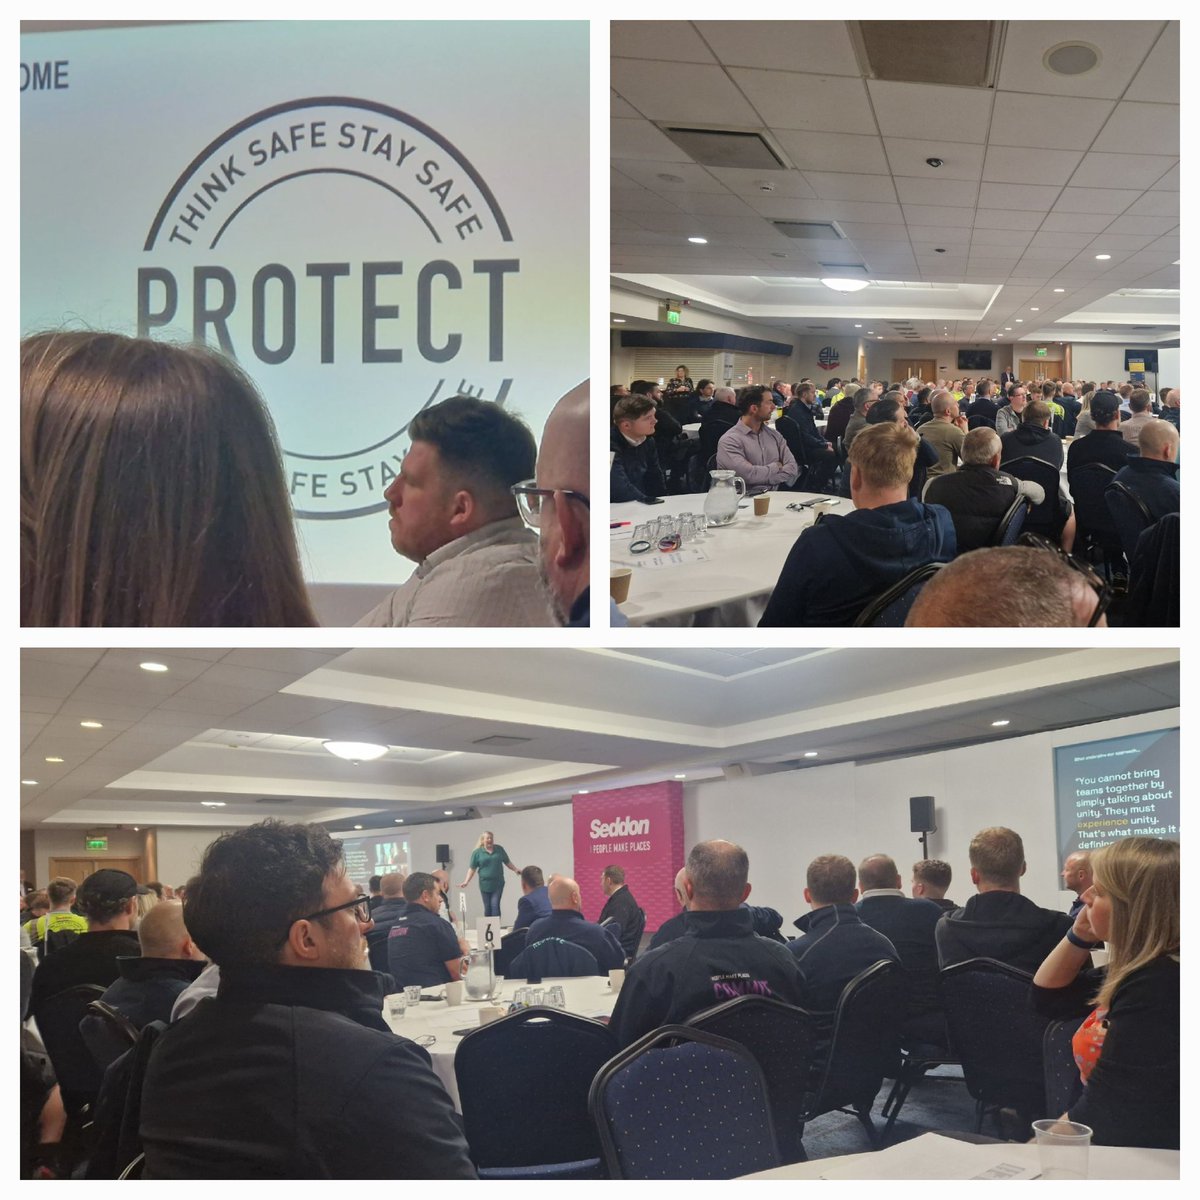 Our annual Safety Conference is underway this morning where we've welcomed 200 of our team from across the business to talk all things health, safety and wellbeing #protect #peoplemakeplaces #keepingeverybodysafe